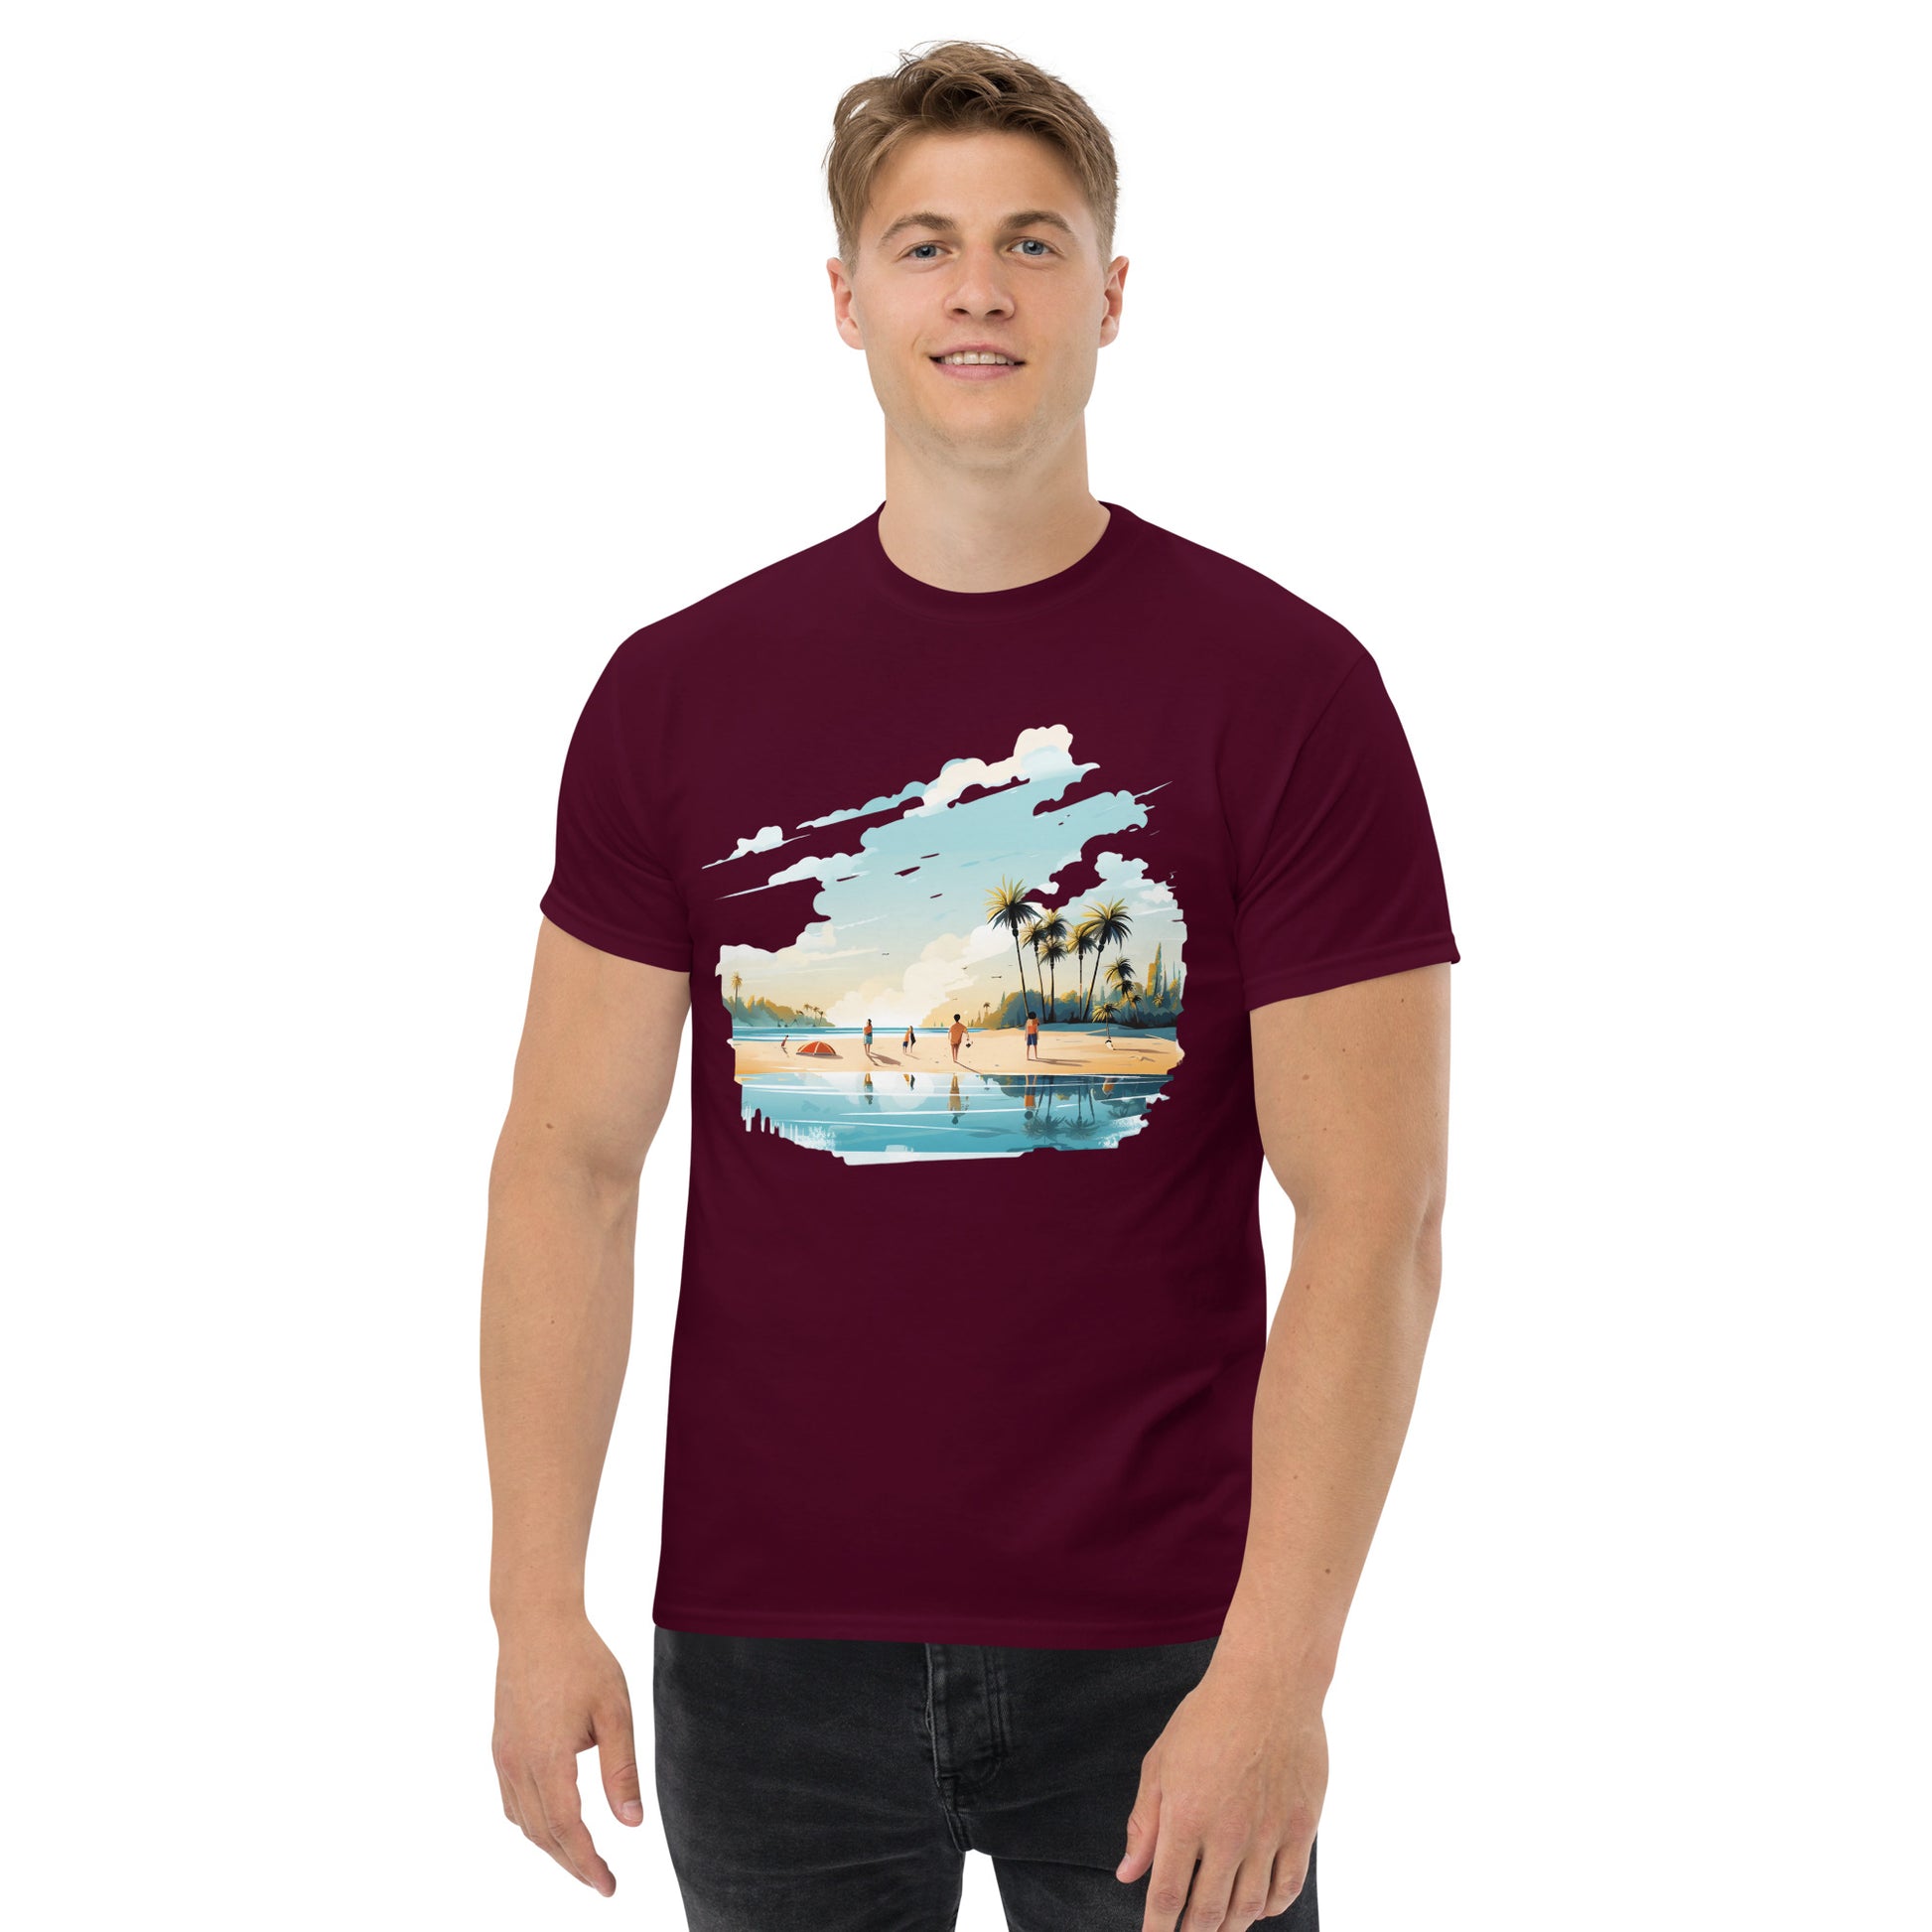 Men with maroon t-shirt and a picture of a island with sea and sand